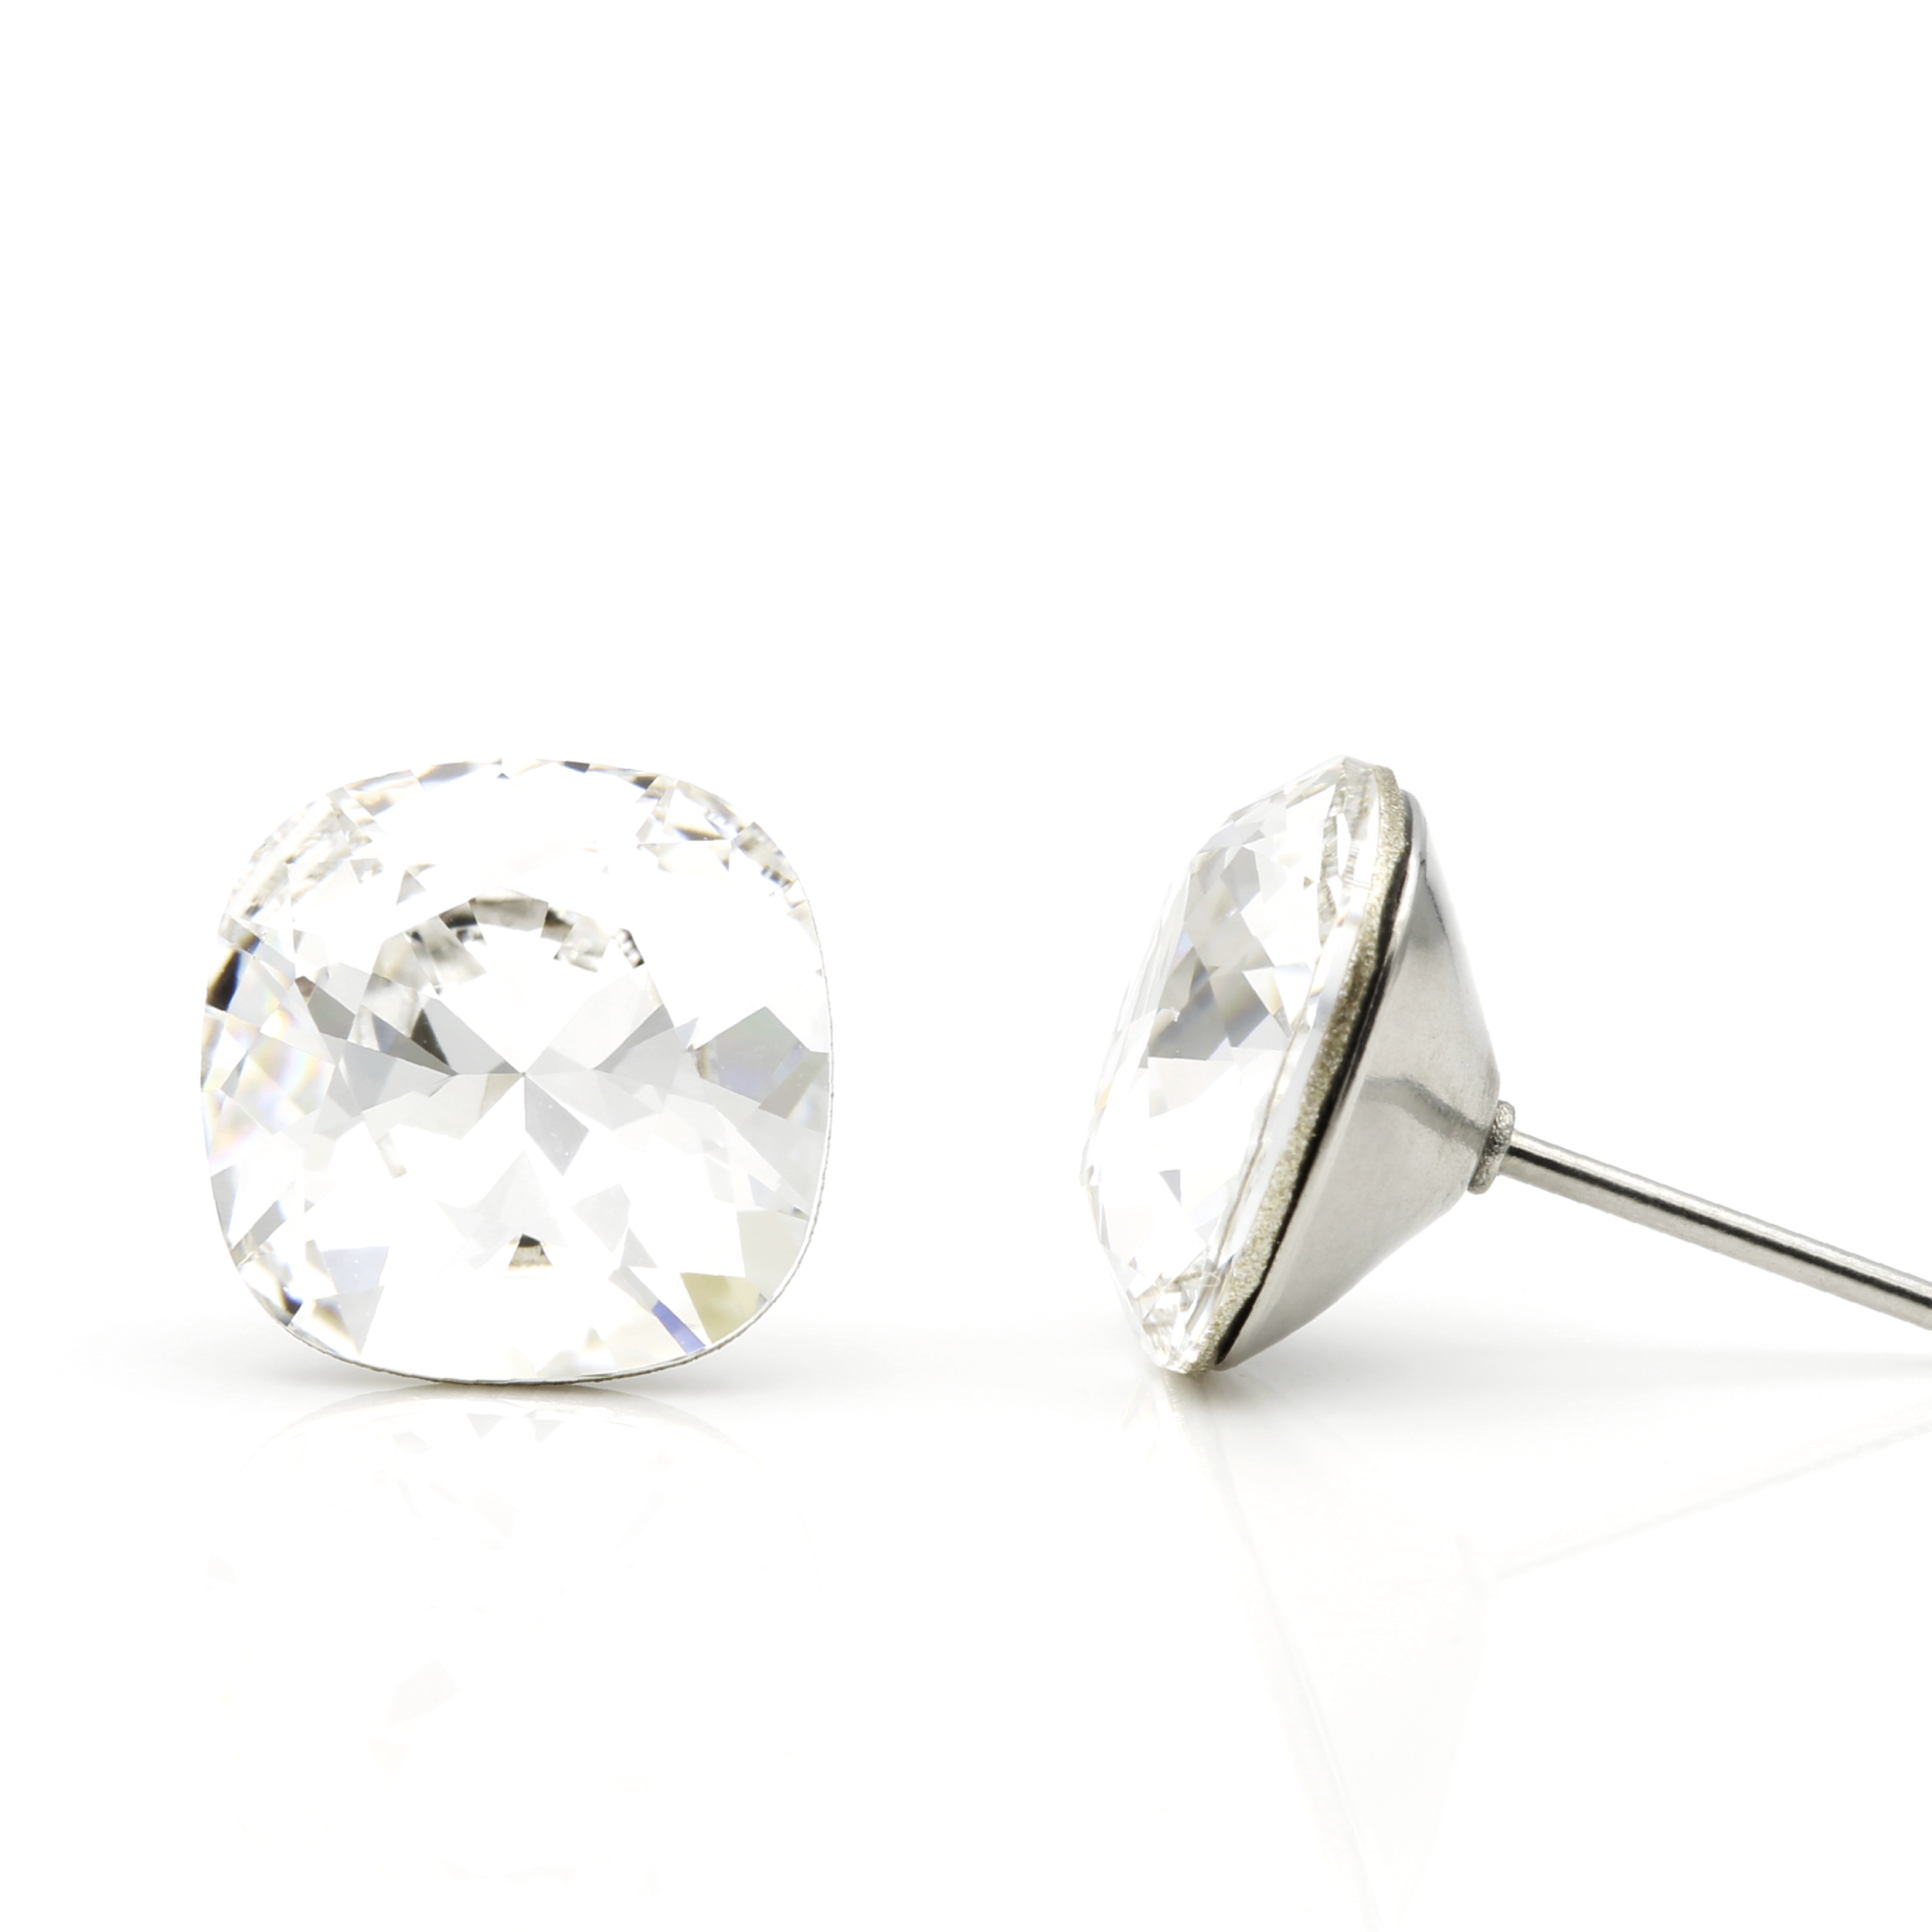 Stunning Sophia - Cushion Crystal Stud Earrings by Seona Glisten Against a Pure White Background